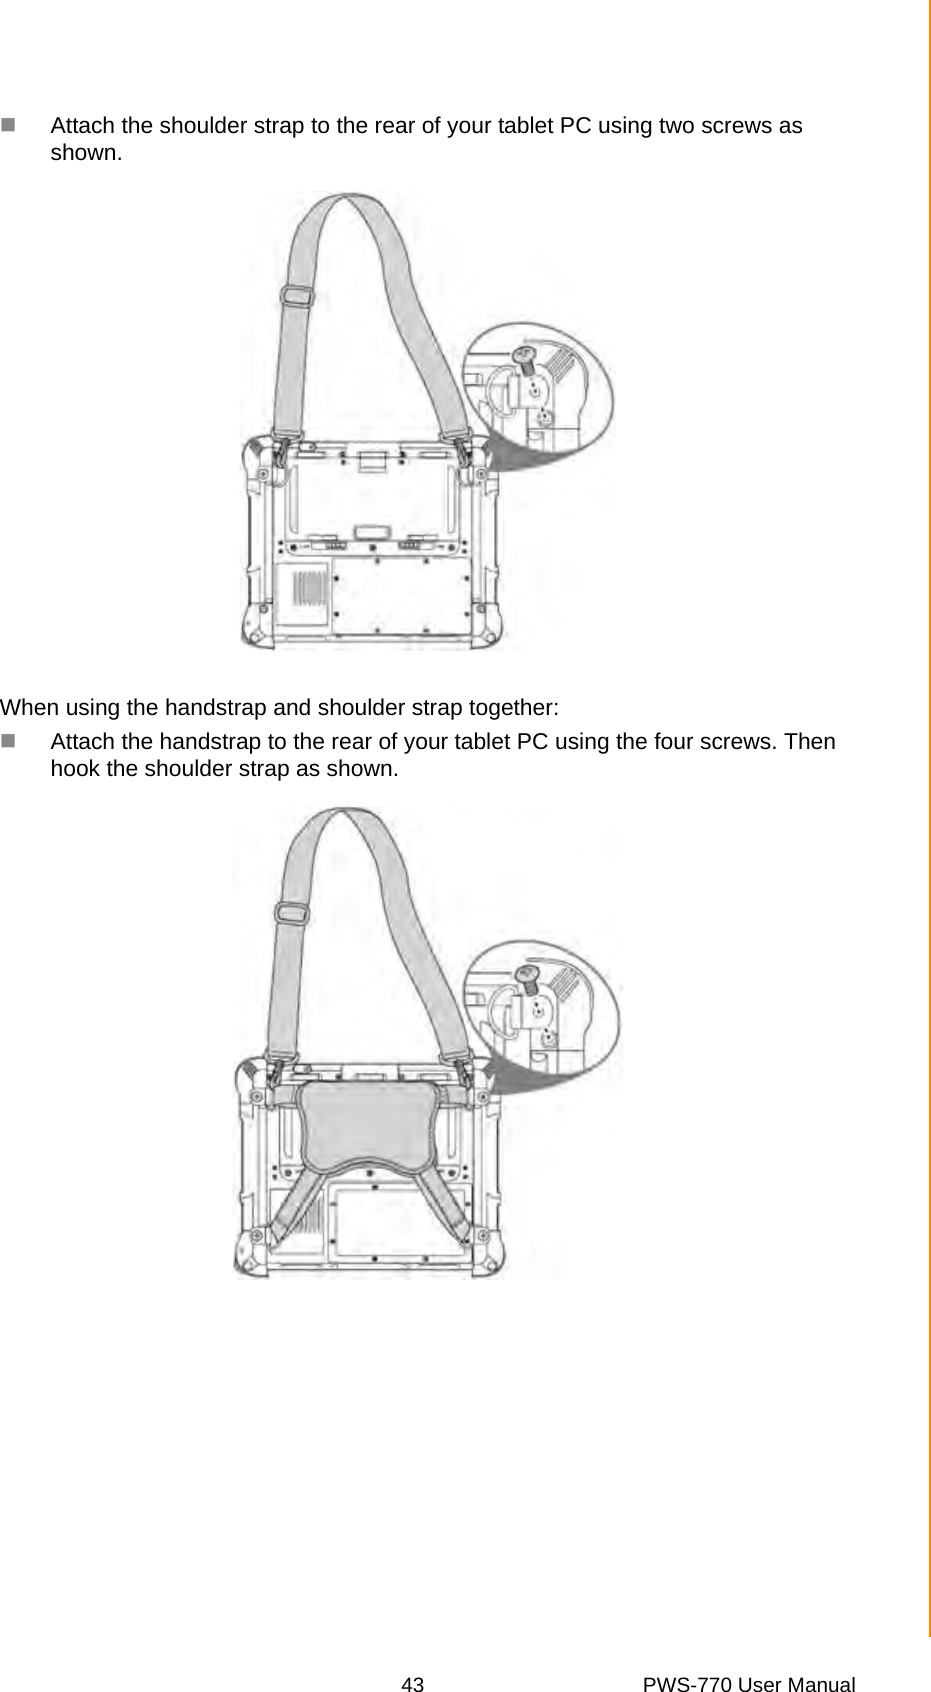 43 PWS-770 User ManualAppendix A SpecificationsAttach the shoulder strap to the rear of your tablet PC using two screws as shown.When using the handstrap and shoulder strap together:Attach the handstrap to the rear of your tablet PC using the four screws. Then hook the shoulder strap as shown.